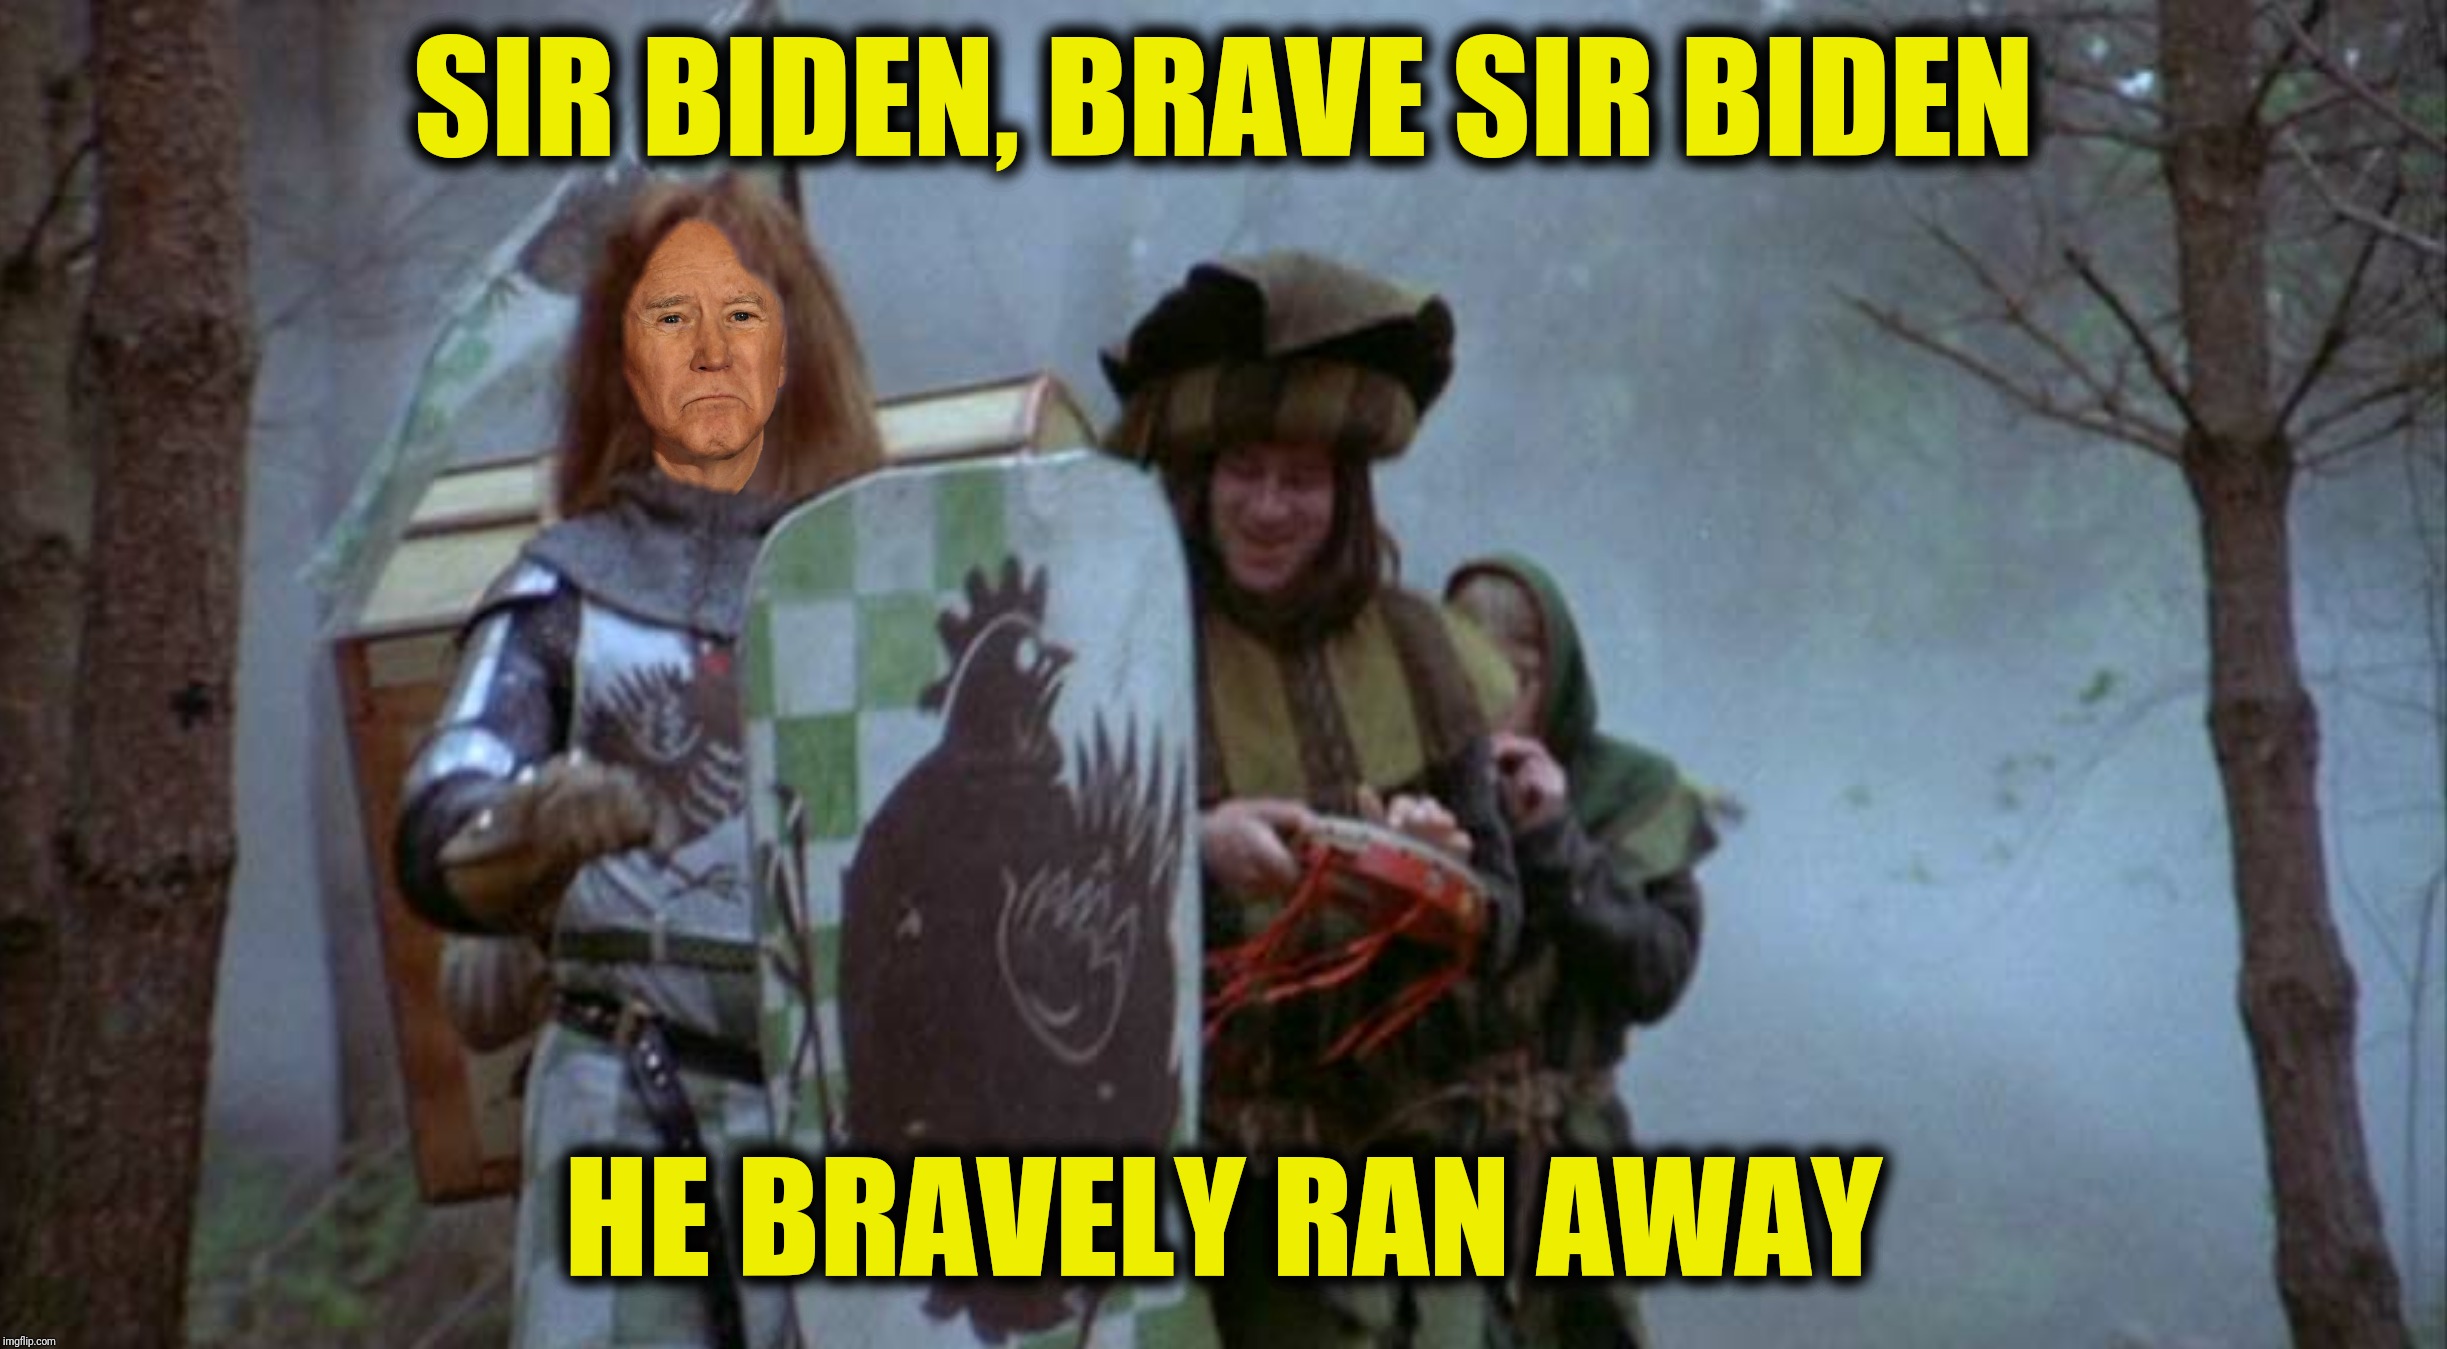 When Bernie raised his ugly head, he bravely turned his tail and fled | SIR BIDEN, BRAVE SIR BIDEN; HE BRAVELY RAN AWAY | image tagged in bad photoshop,monty python and the holy grail,joe biden,sir chicken | made w/ Imgflip meme maker